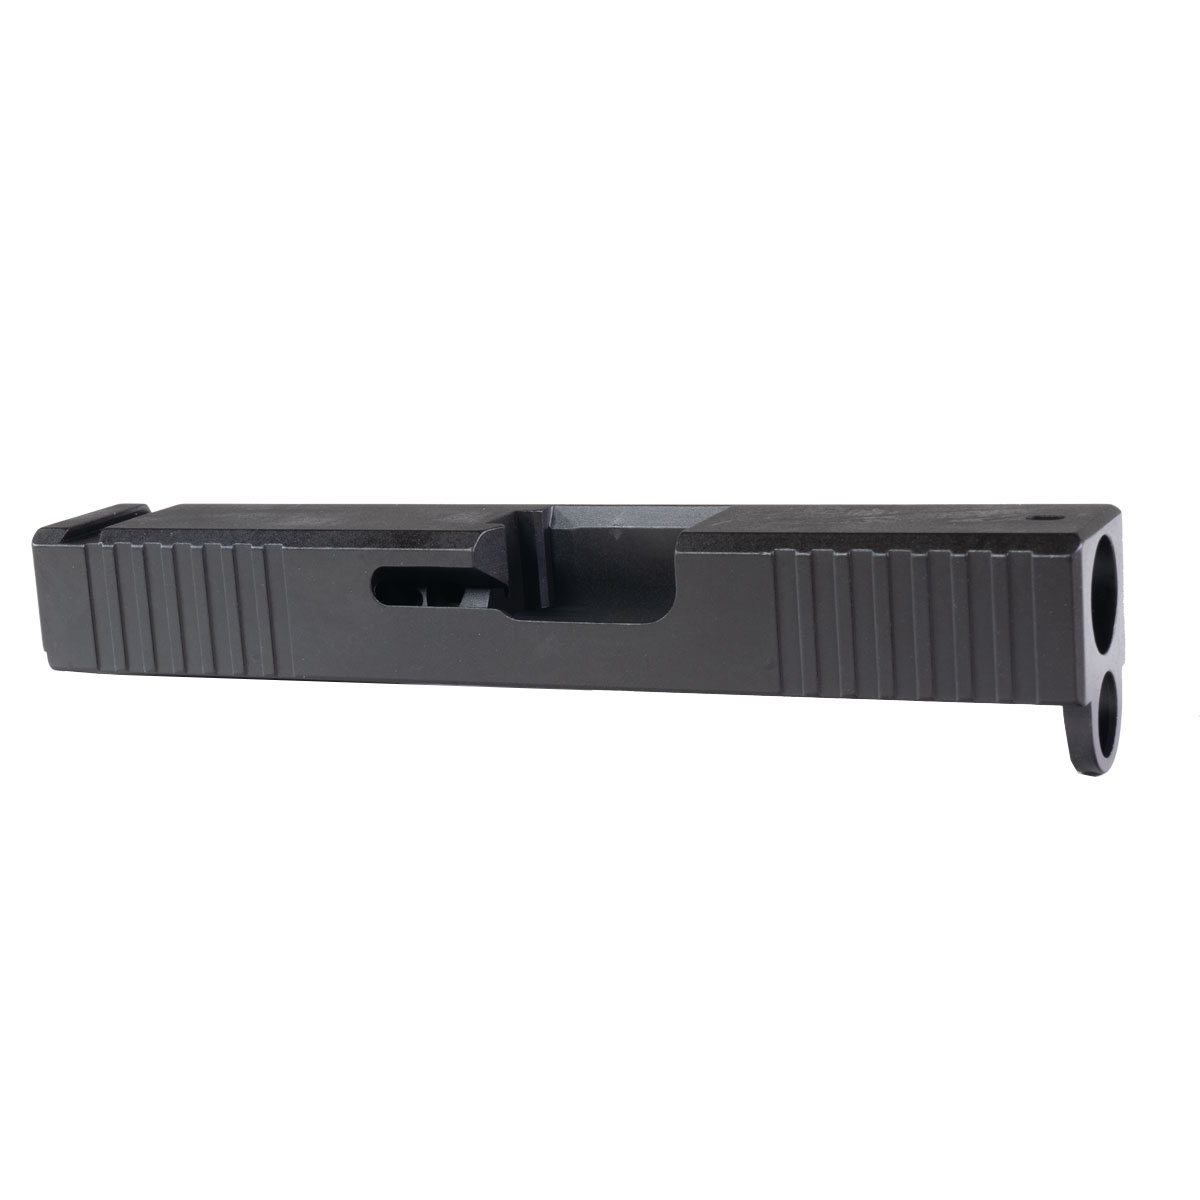 Patmos Arms Judah 26 Subcompact Slide - Gen3 G26 416 Heat Treated Stainless Steel Nitride Finish